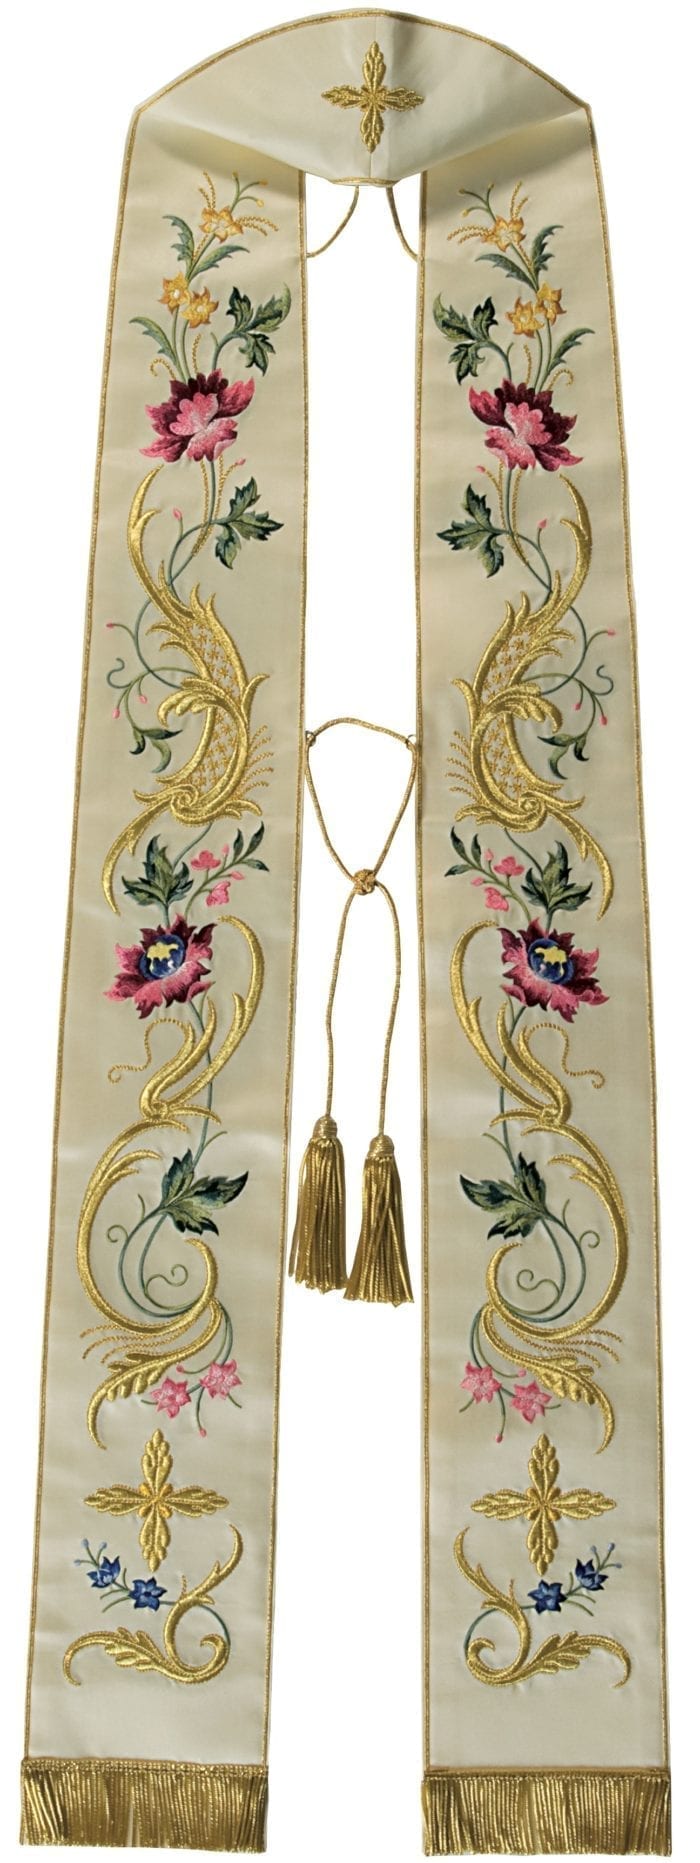 "Onesimo" Maranatha Lab stole in satin fabric, entirely embroidered in gold with floral motifs and crosses